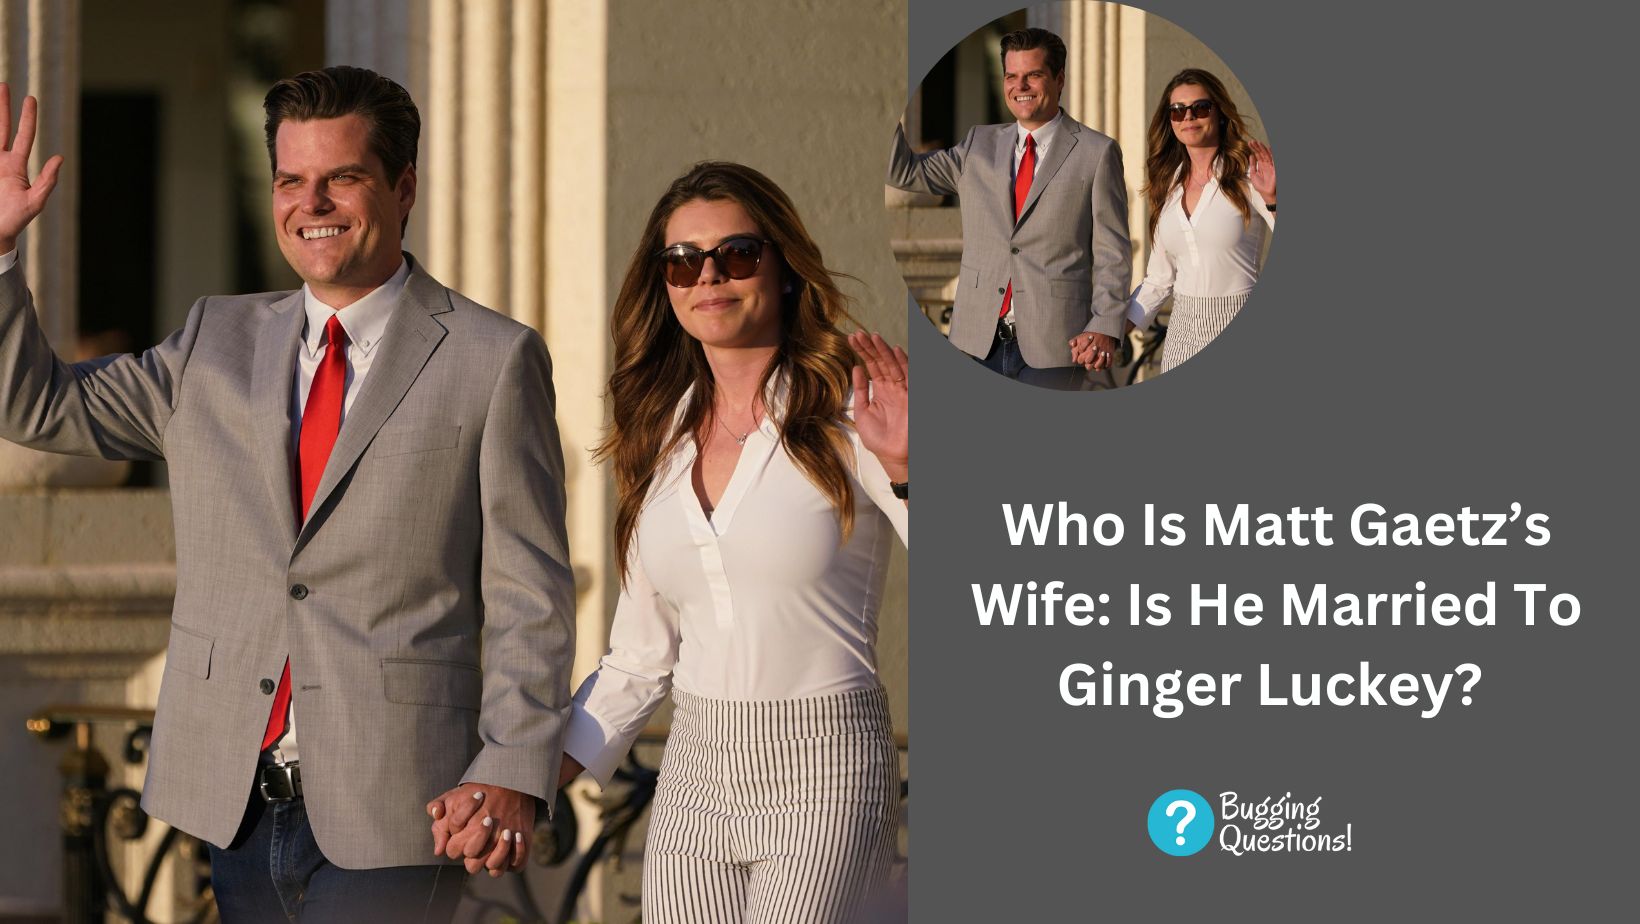 Who Is Matt Gaetz’s Wife: Is He Married To Ginger Luckey? Know More About Their Relationship Timeline